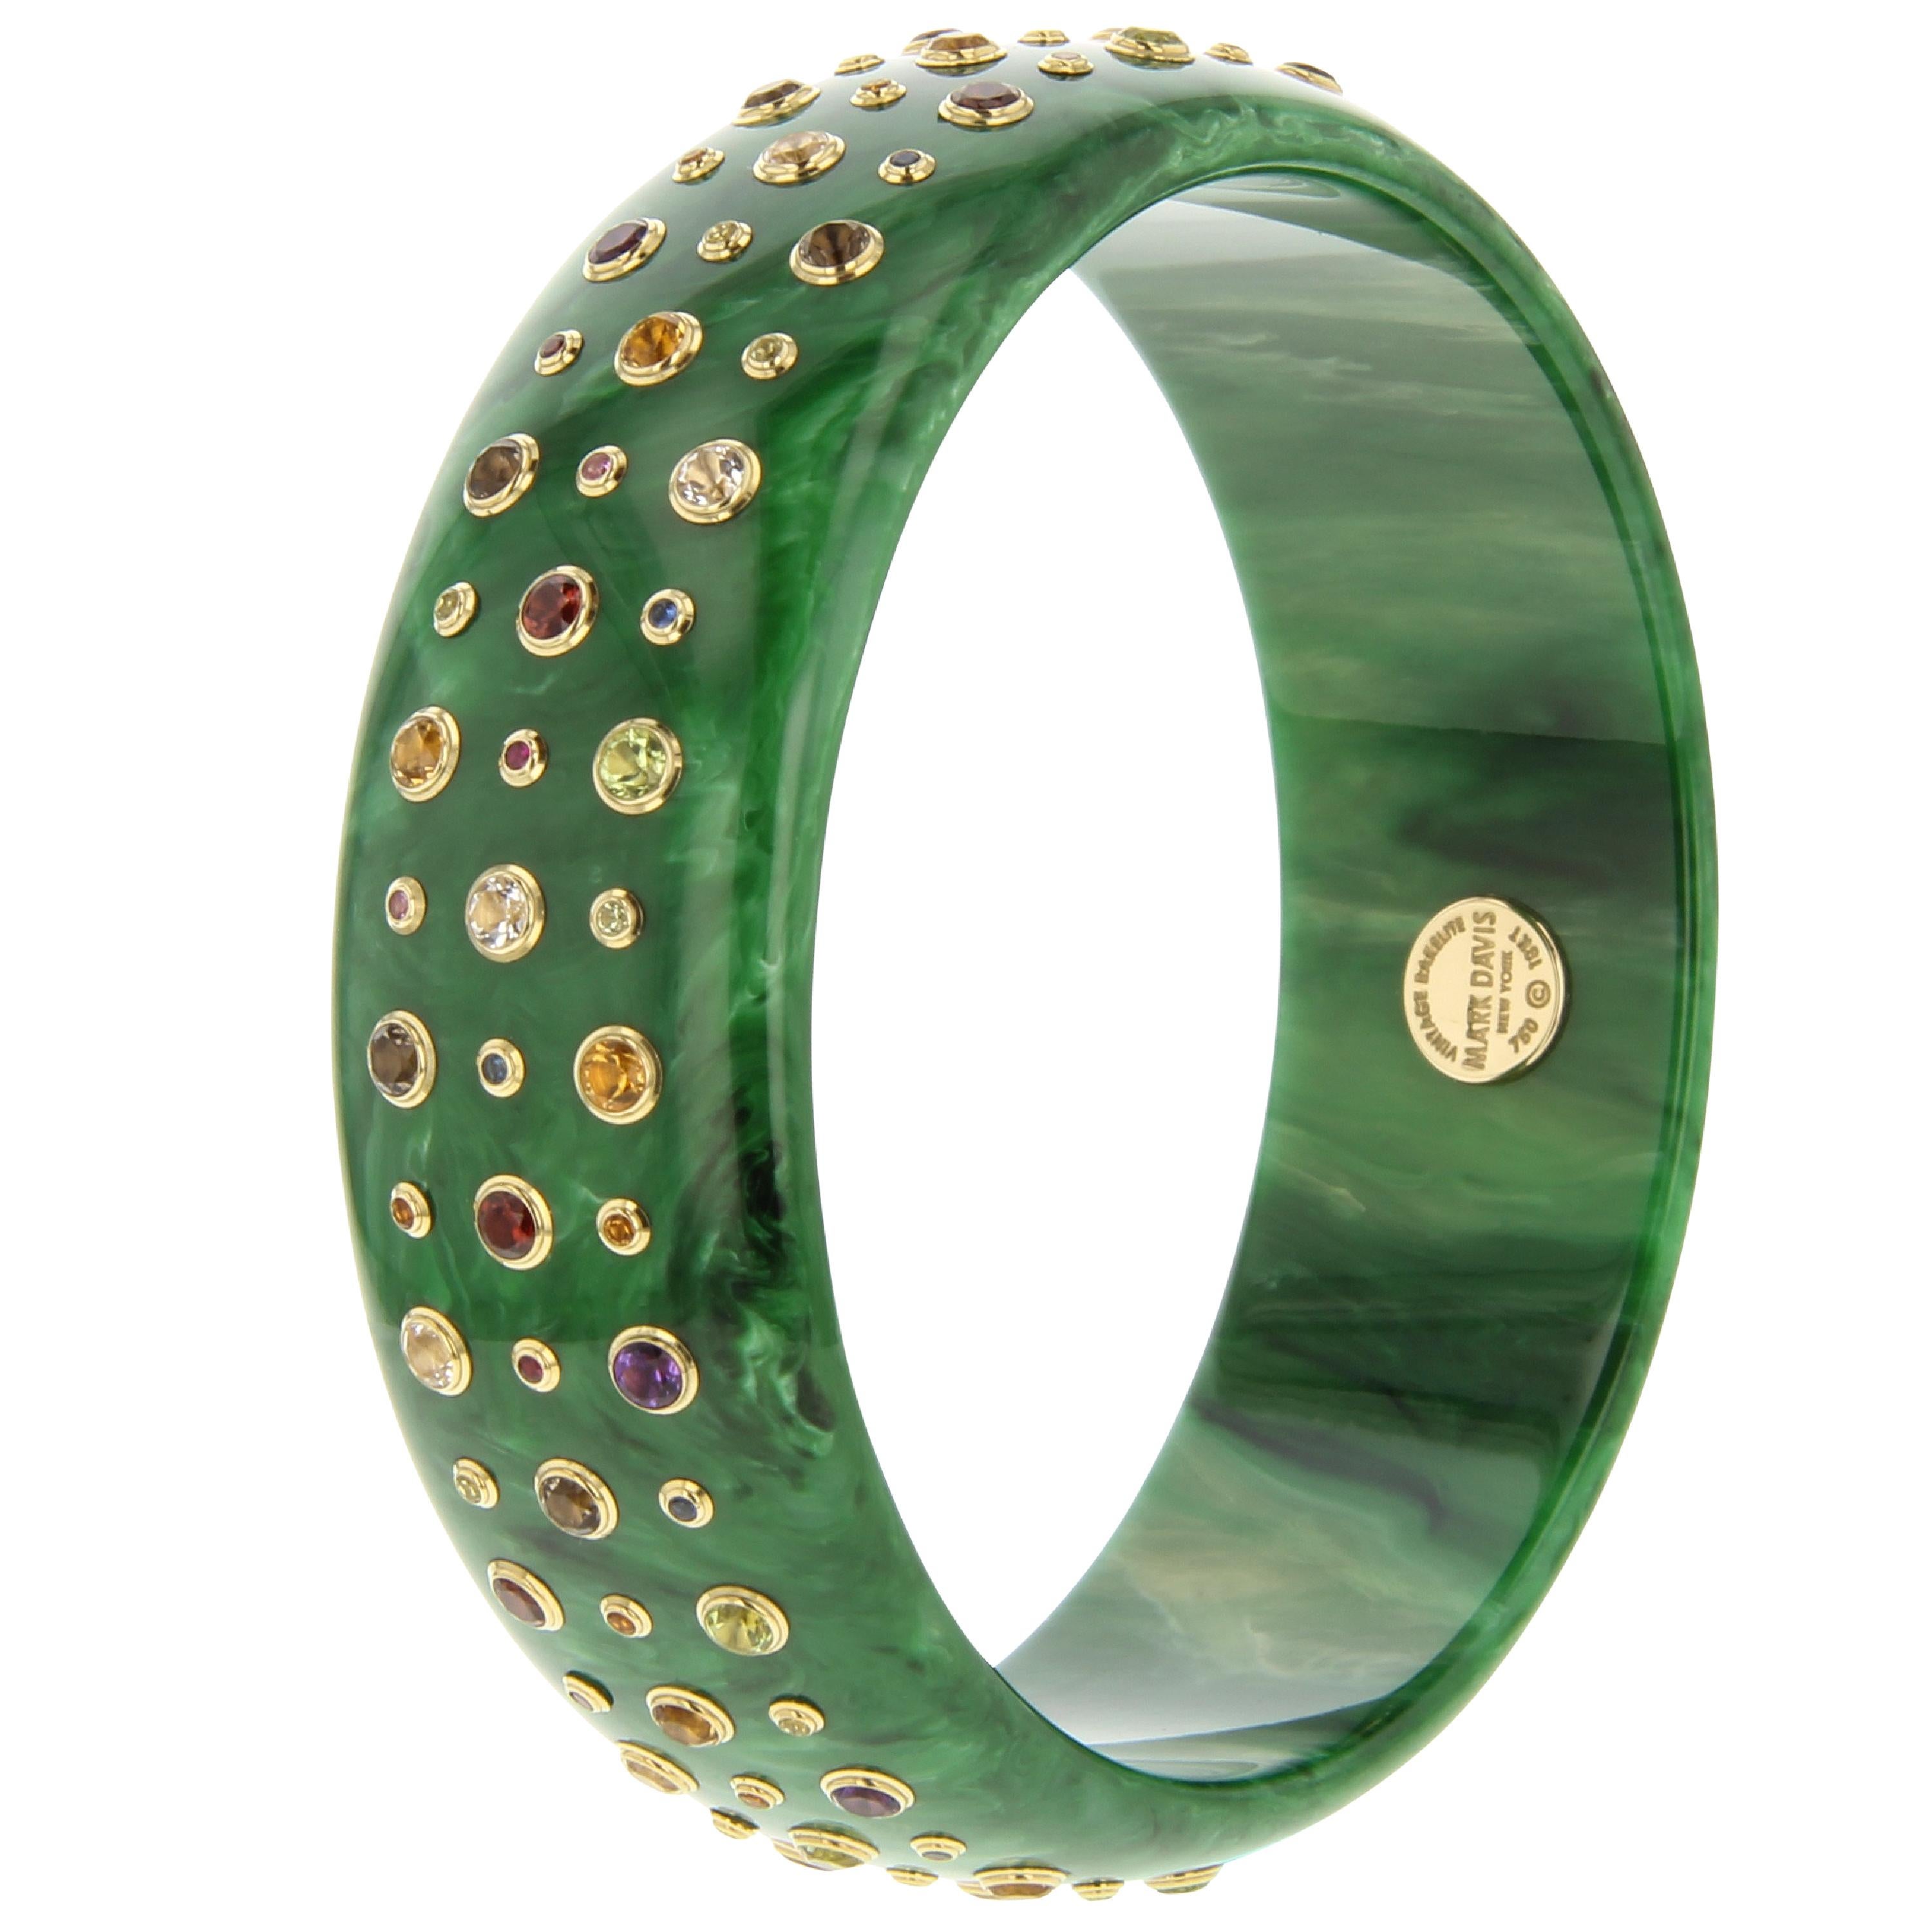 This Mark Davis bangle is simple but certainly not plain. A beautiful marbled green vintage bakelite bangle has been precisely set with with three rows of fine gemstones in alternating sizes. The bangle is simple, playful and a surprisingly